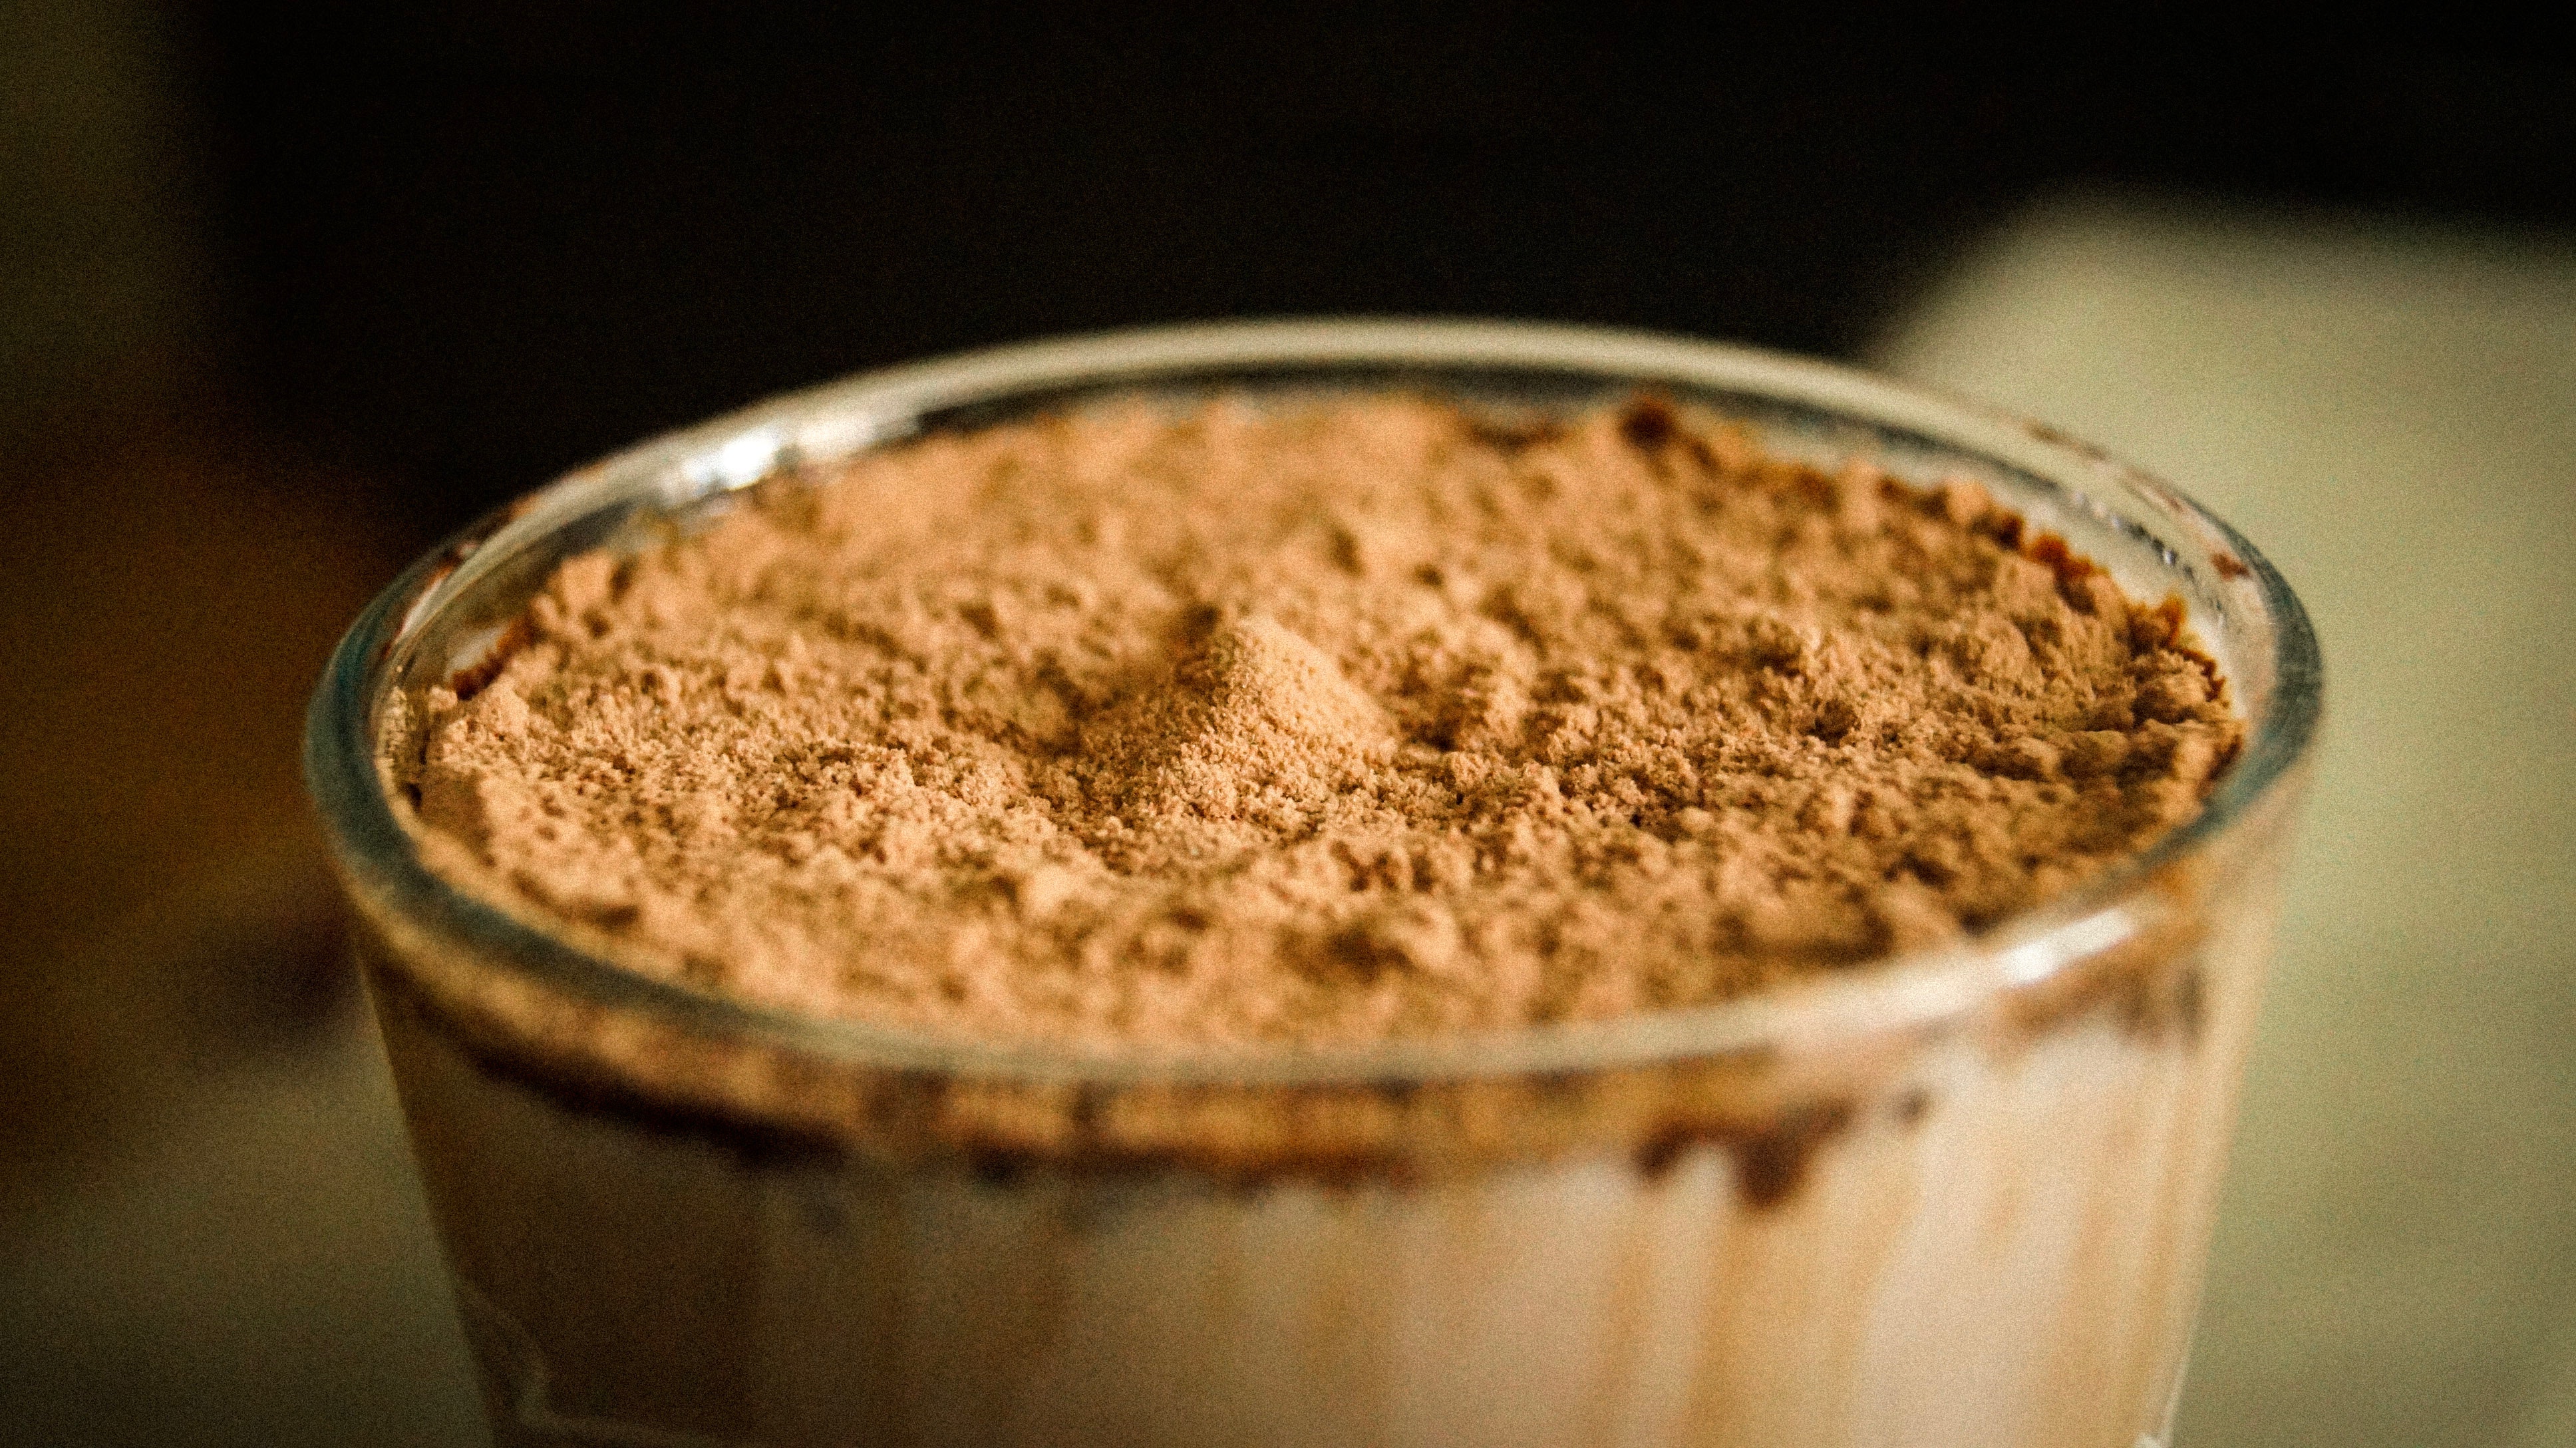 Find the best protein powder that suits your needs